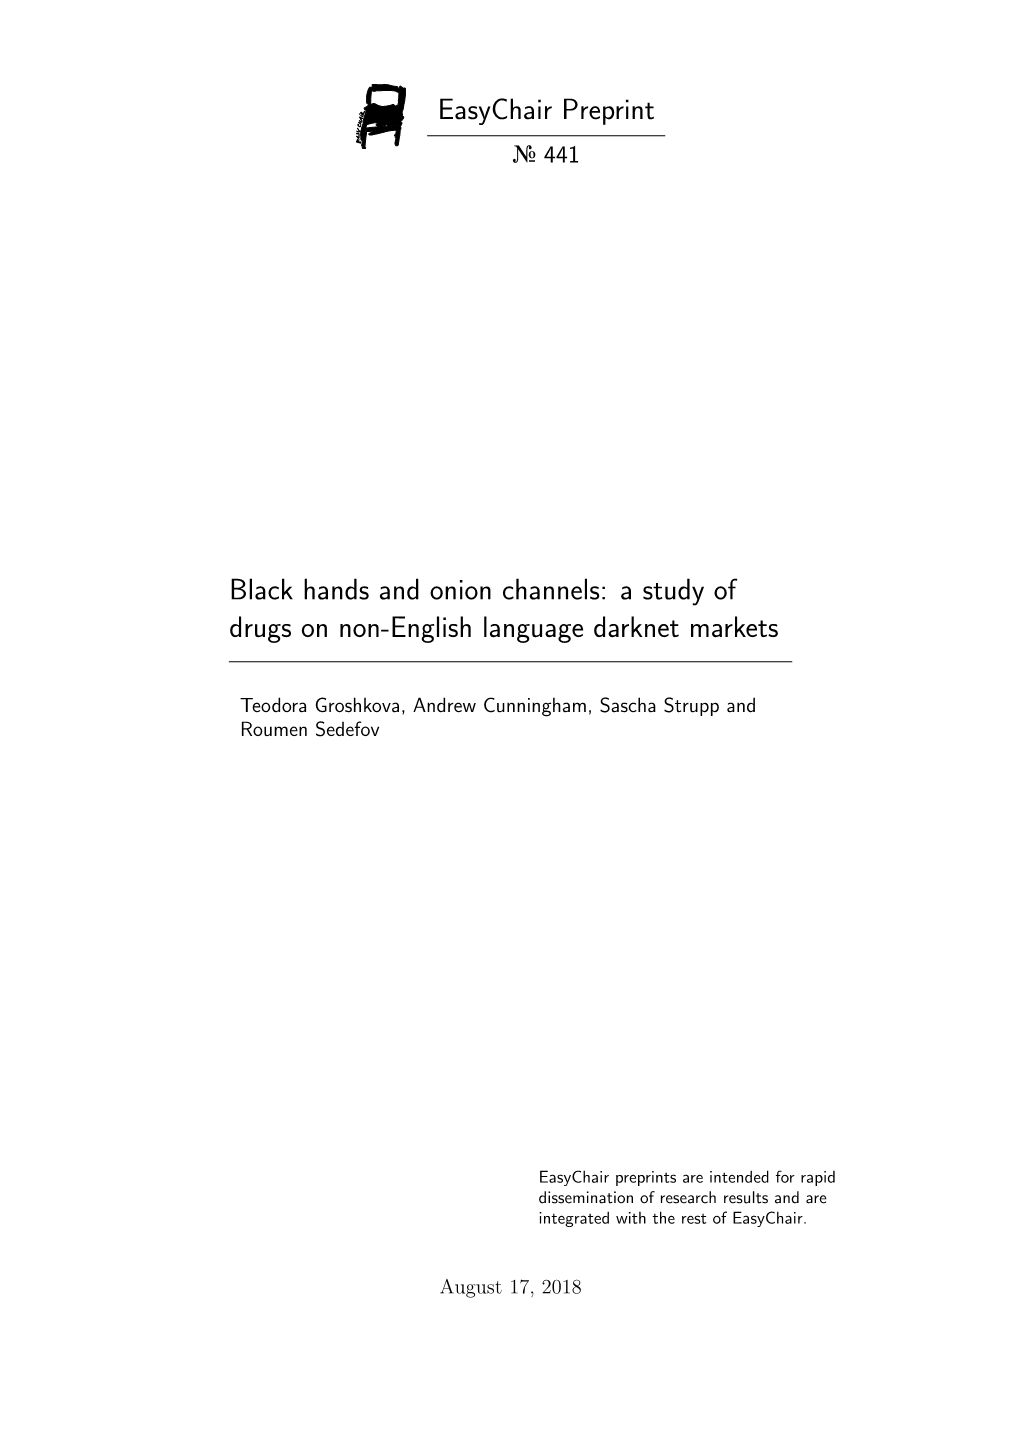 Easychair Preprint Black Hands and Onion Channels: a Study of Drugs on Non-English Language Darknet Markets